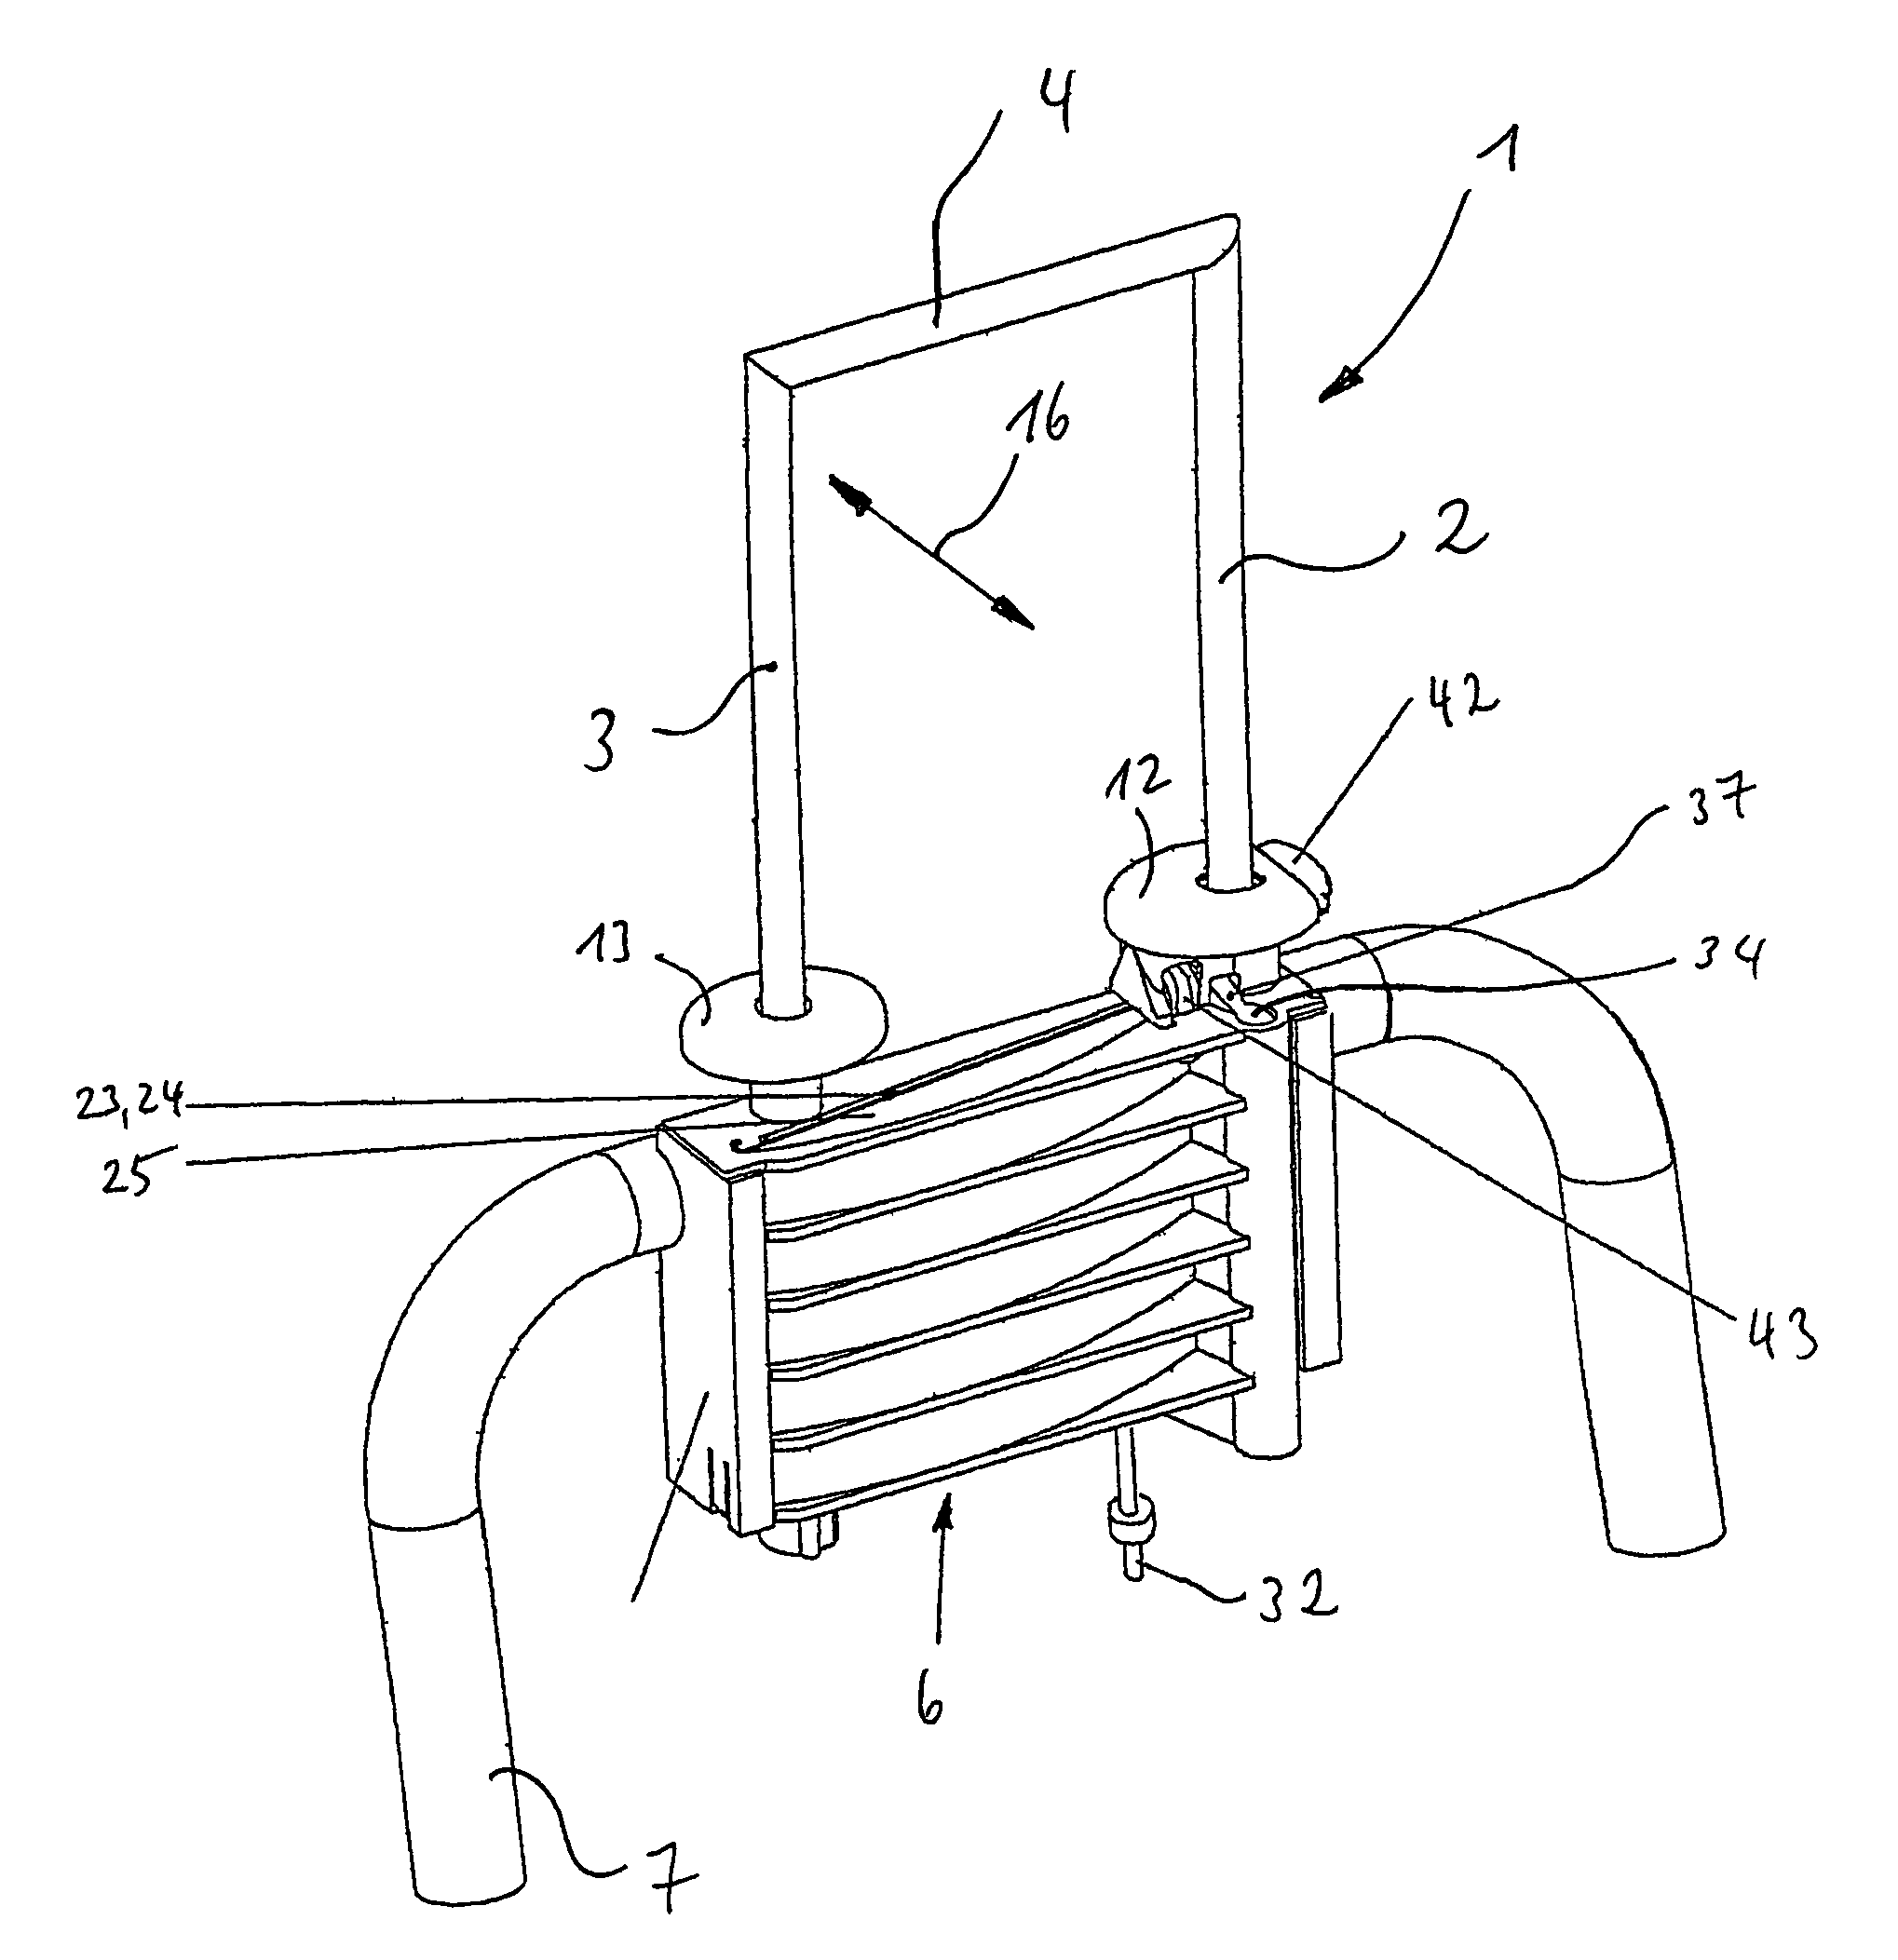 Vehicle seat with a headrest and headrest adjustment assembly